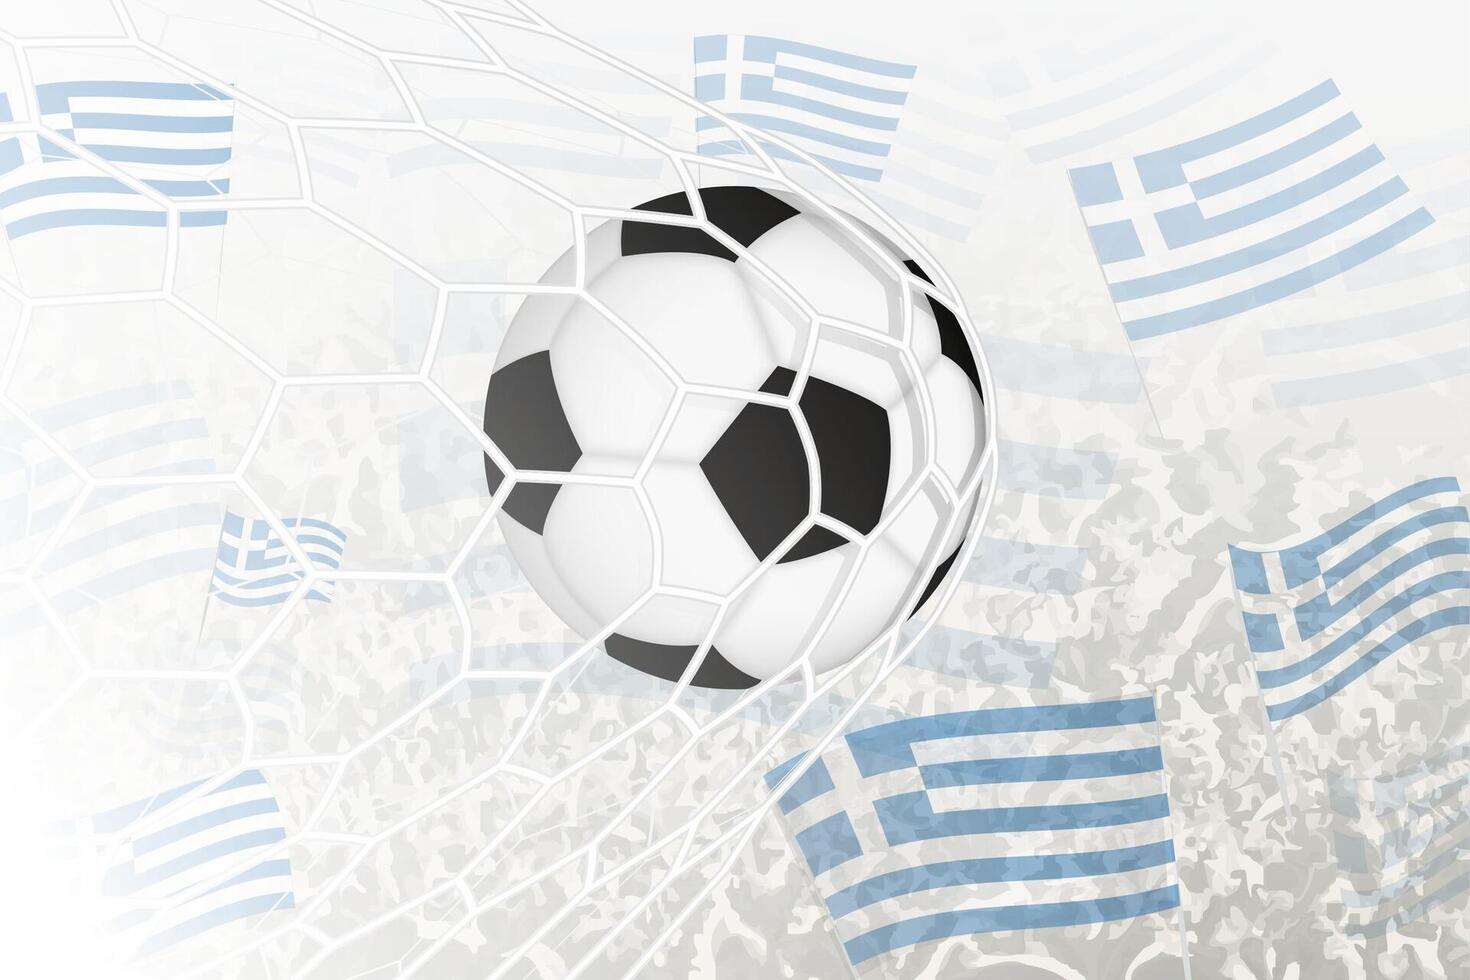 National Football team of Greece scored goal. Ball in goal net, while football supporters are waving the Greece flag in the background. vector